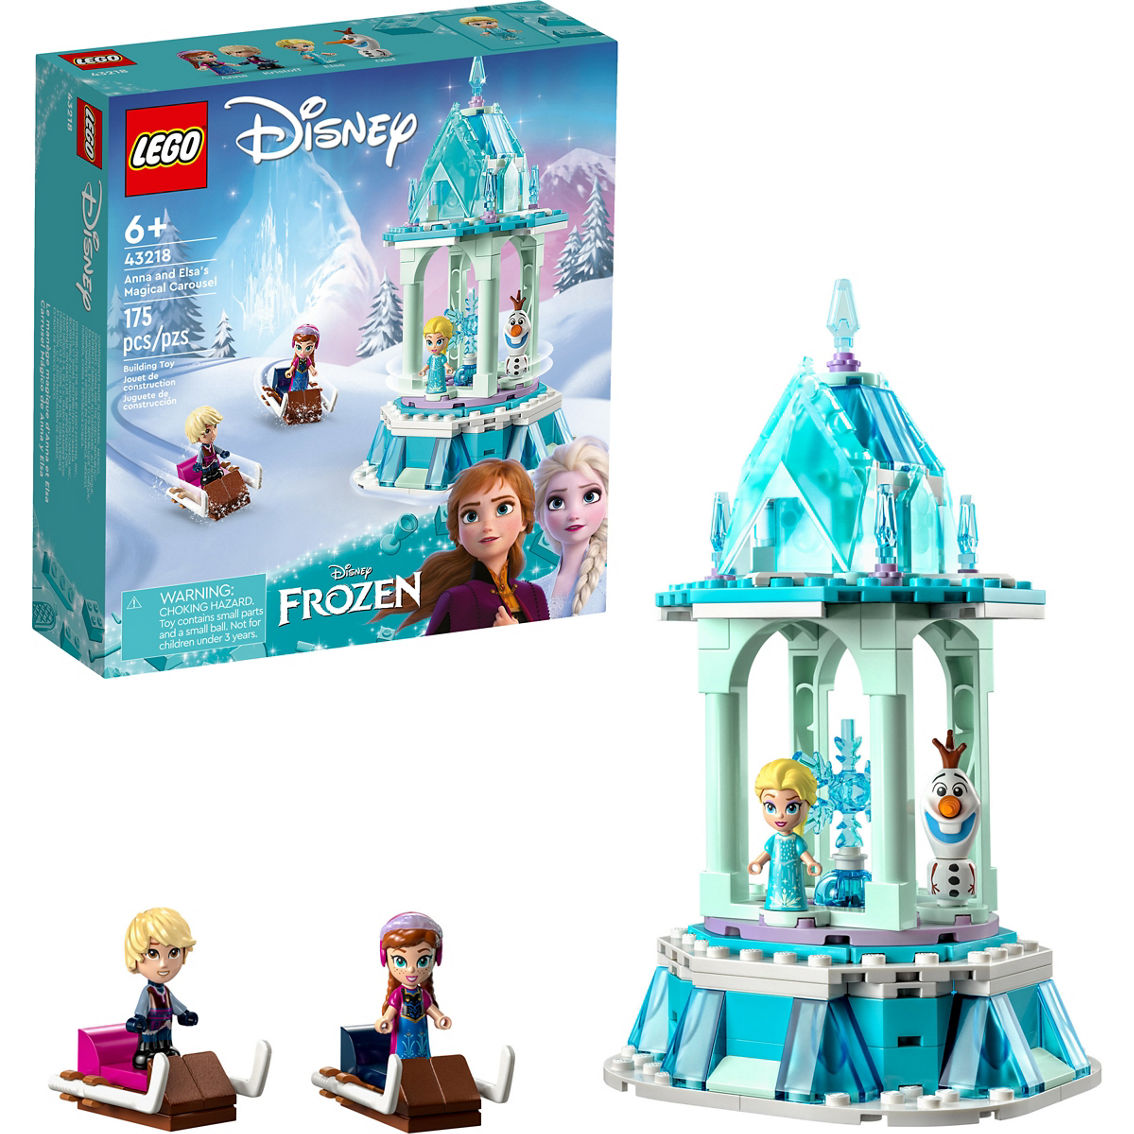 LEGO Disney Anna and Elsa's Magical Carousel 43218 Building Toy Set - Image 4 of 9